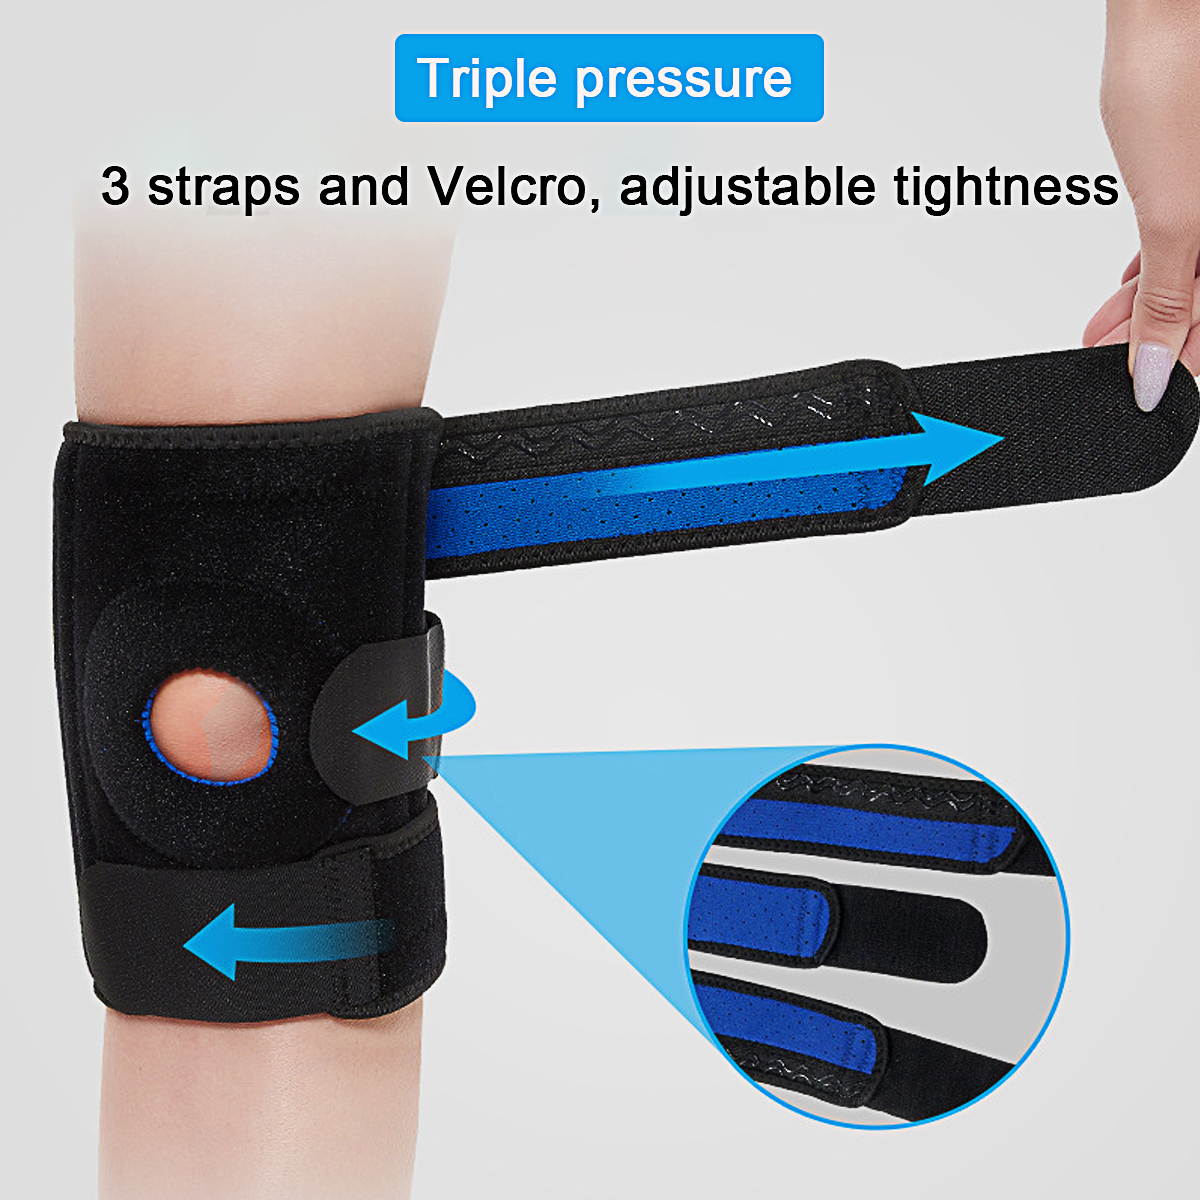 1-PCS-Knee-Support-Spring-Force-Non-Slip-Power-Joint-Protector-Knee-Pads-Rebound-Protective-Gear-Run-1933870-5